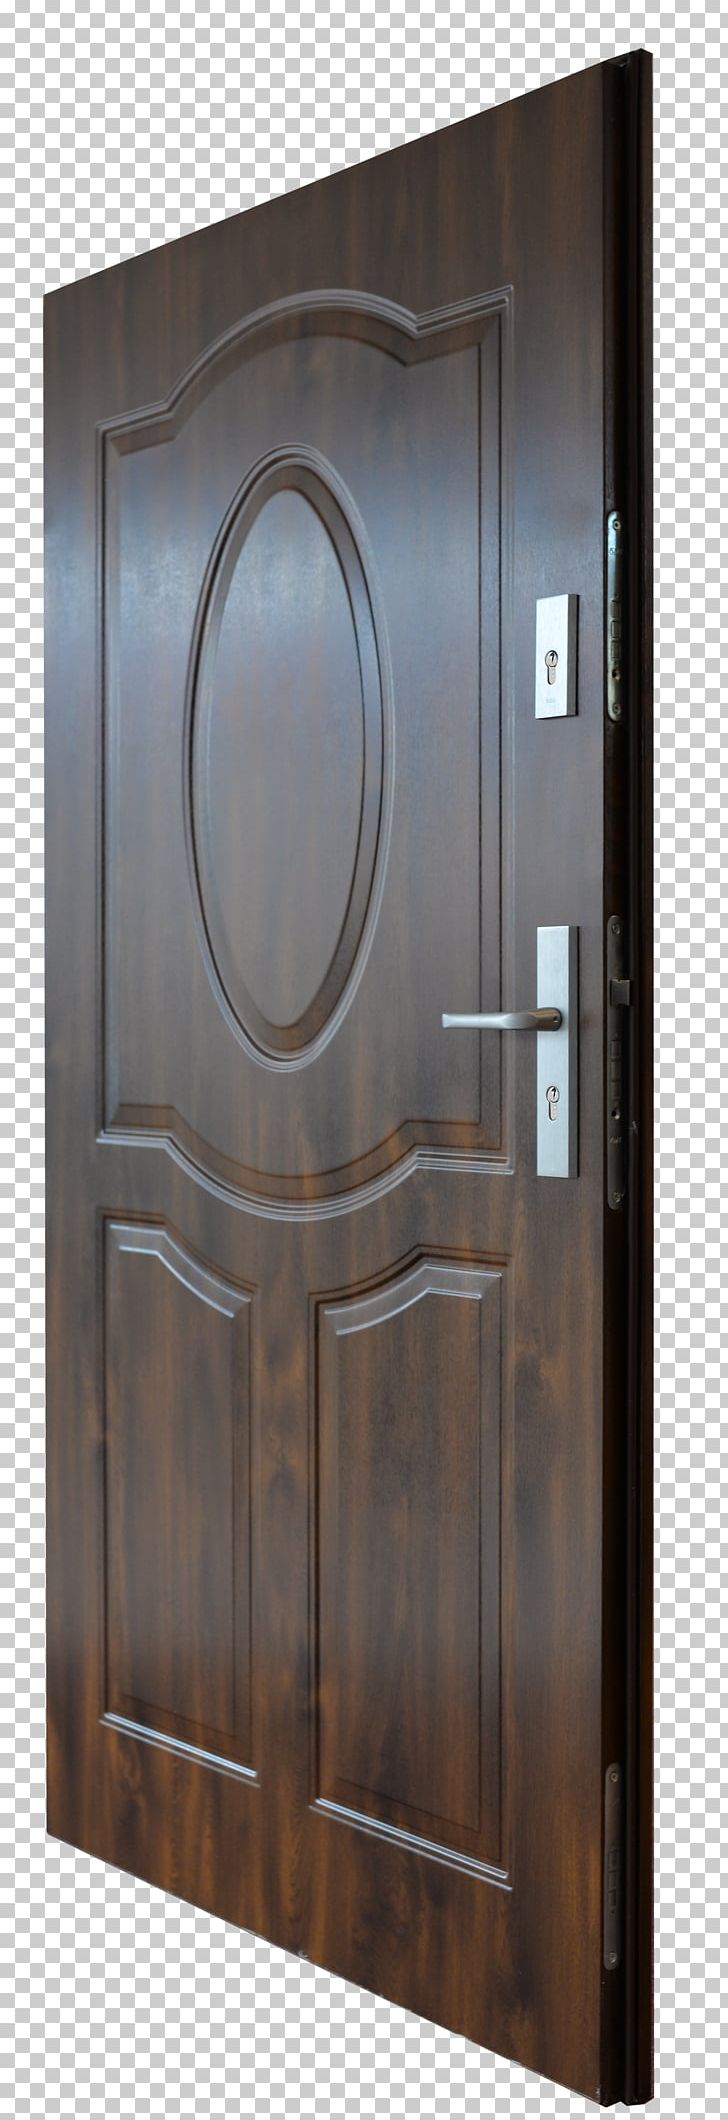 Window Door Drzwi Zewnętrzne Drzwi Antywłamaniowe House PNG, Clipart, Architectural Engineering, Bolt, Chambranle, Door, Furniture Free PNG Download